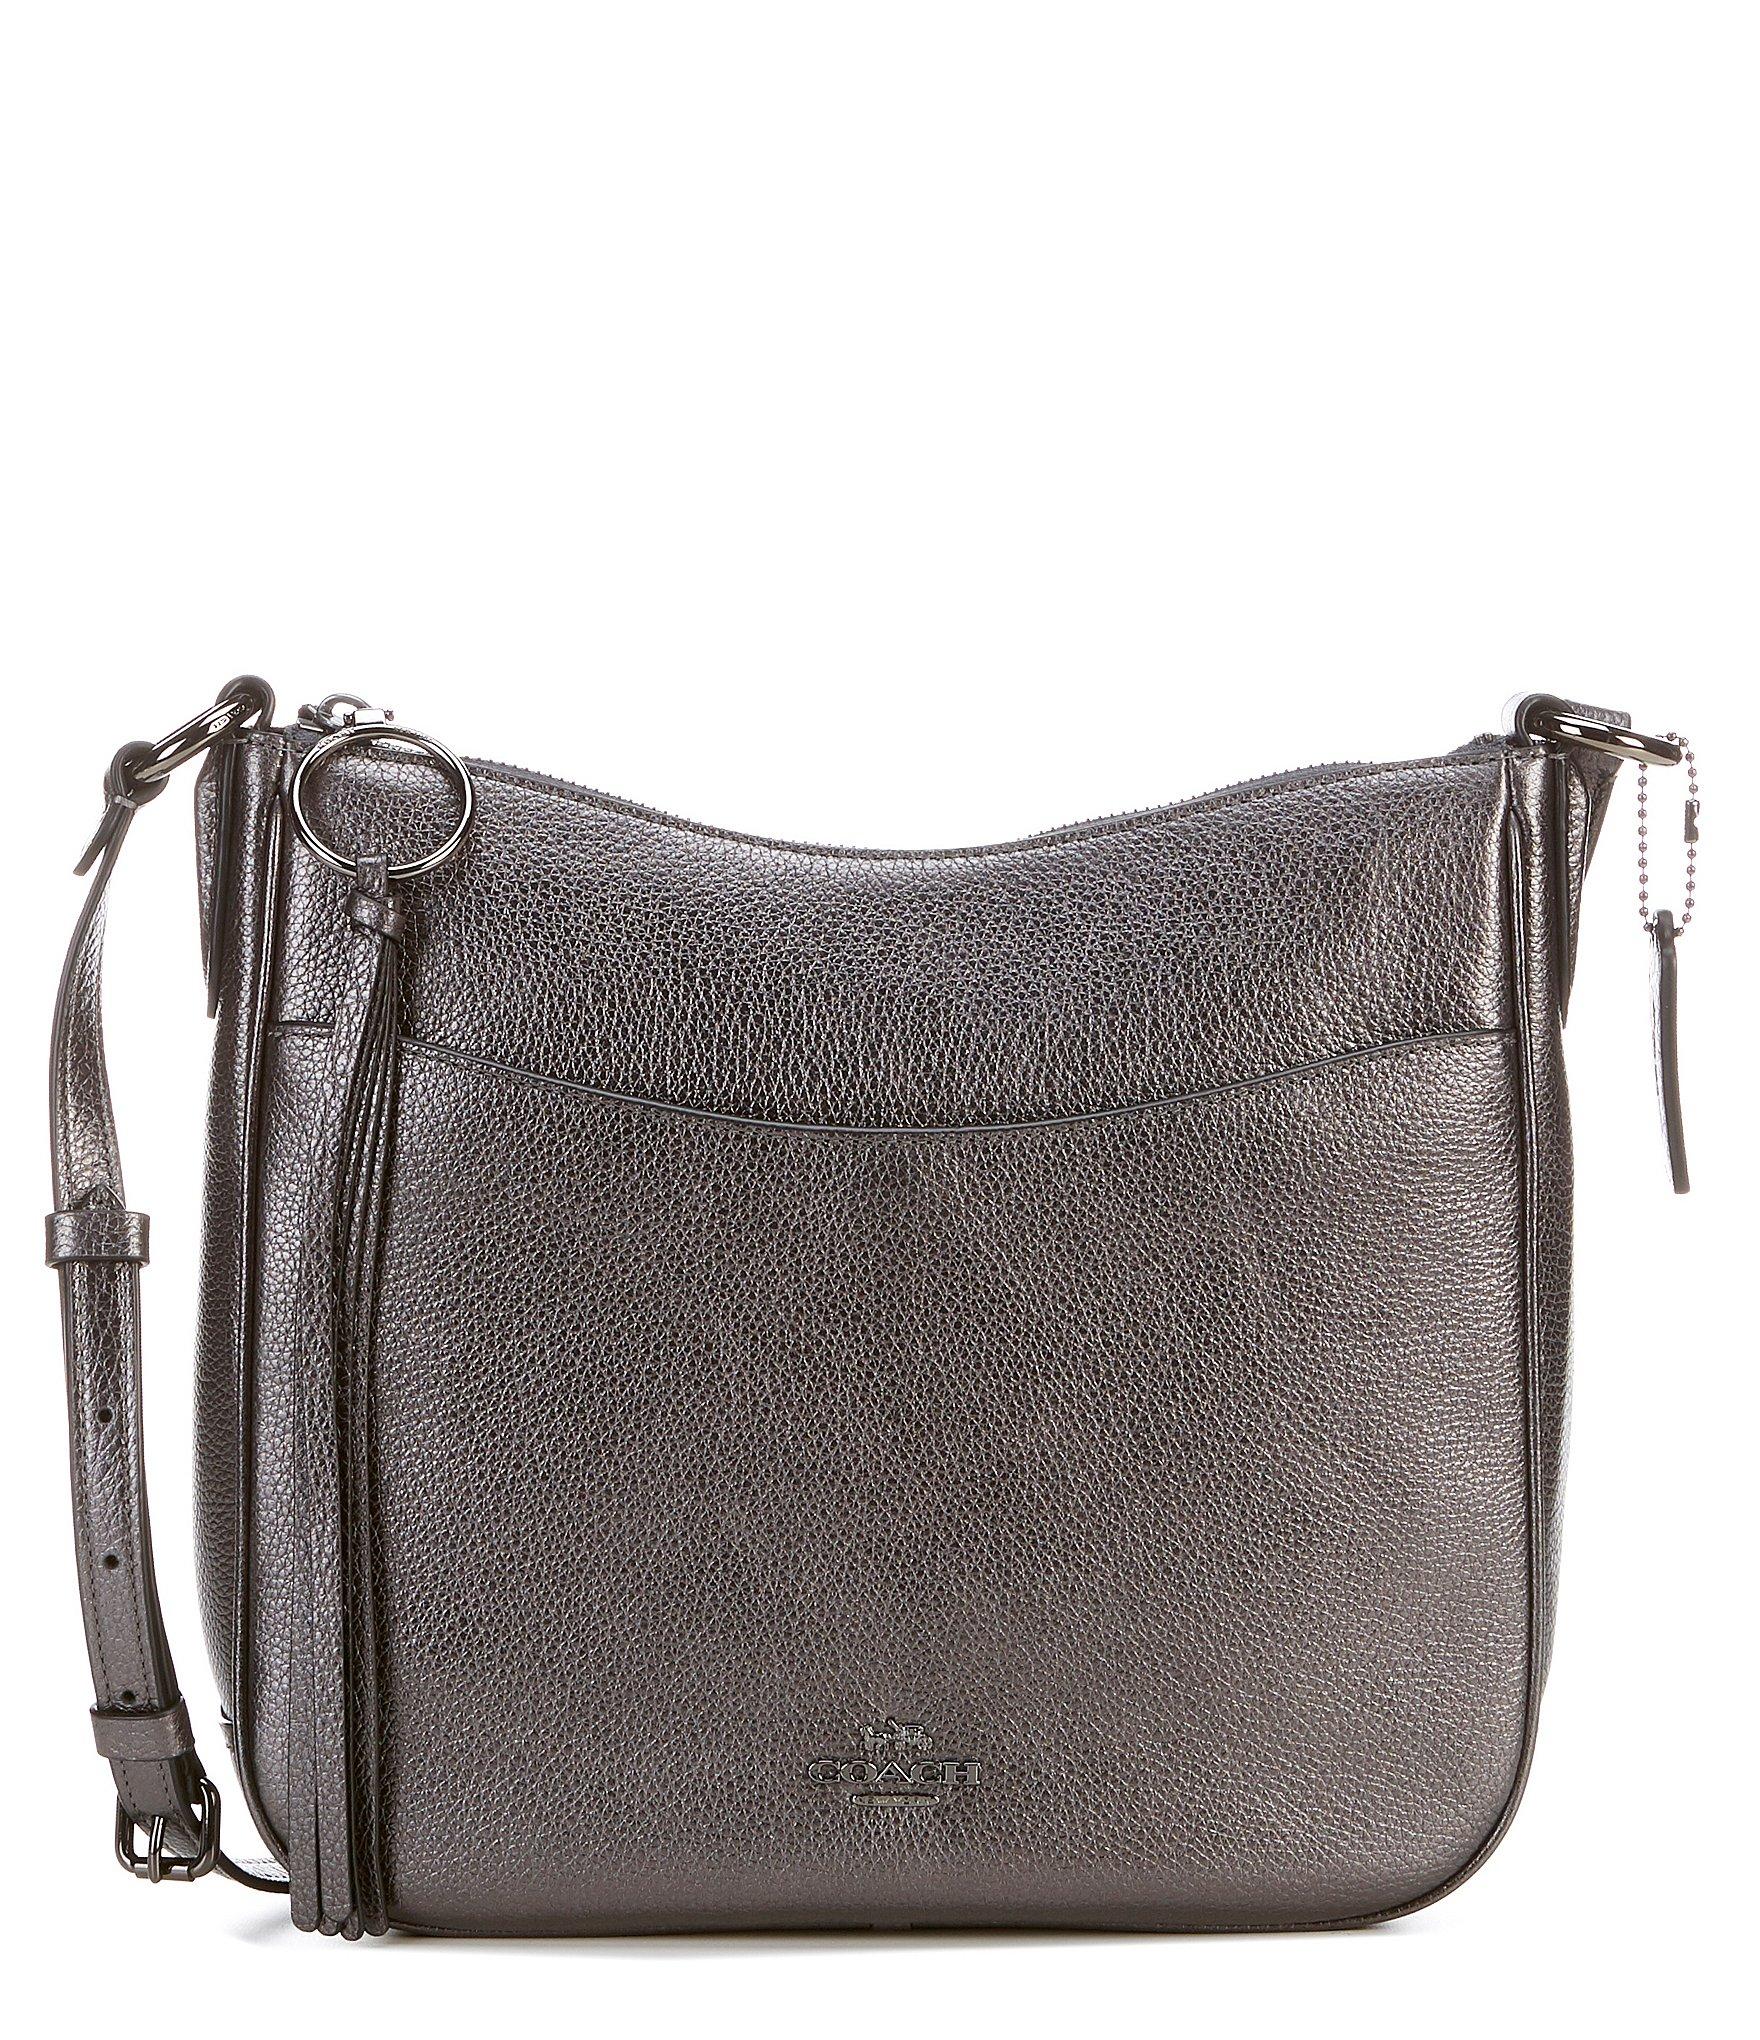 COACH Metallic Pebble Leather Chaise Convertible Crossbody Bag in n,a (Gray) - Lyst